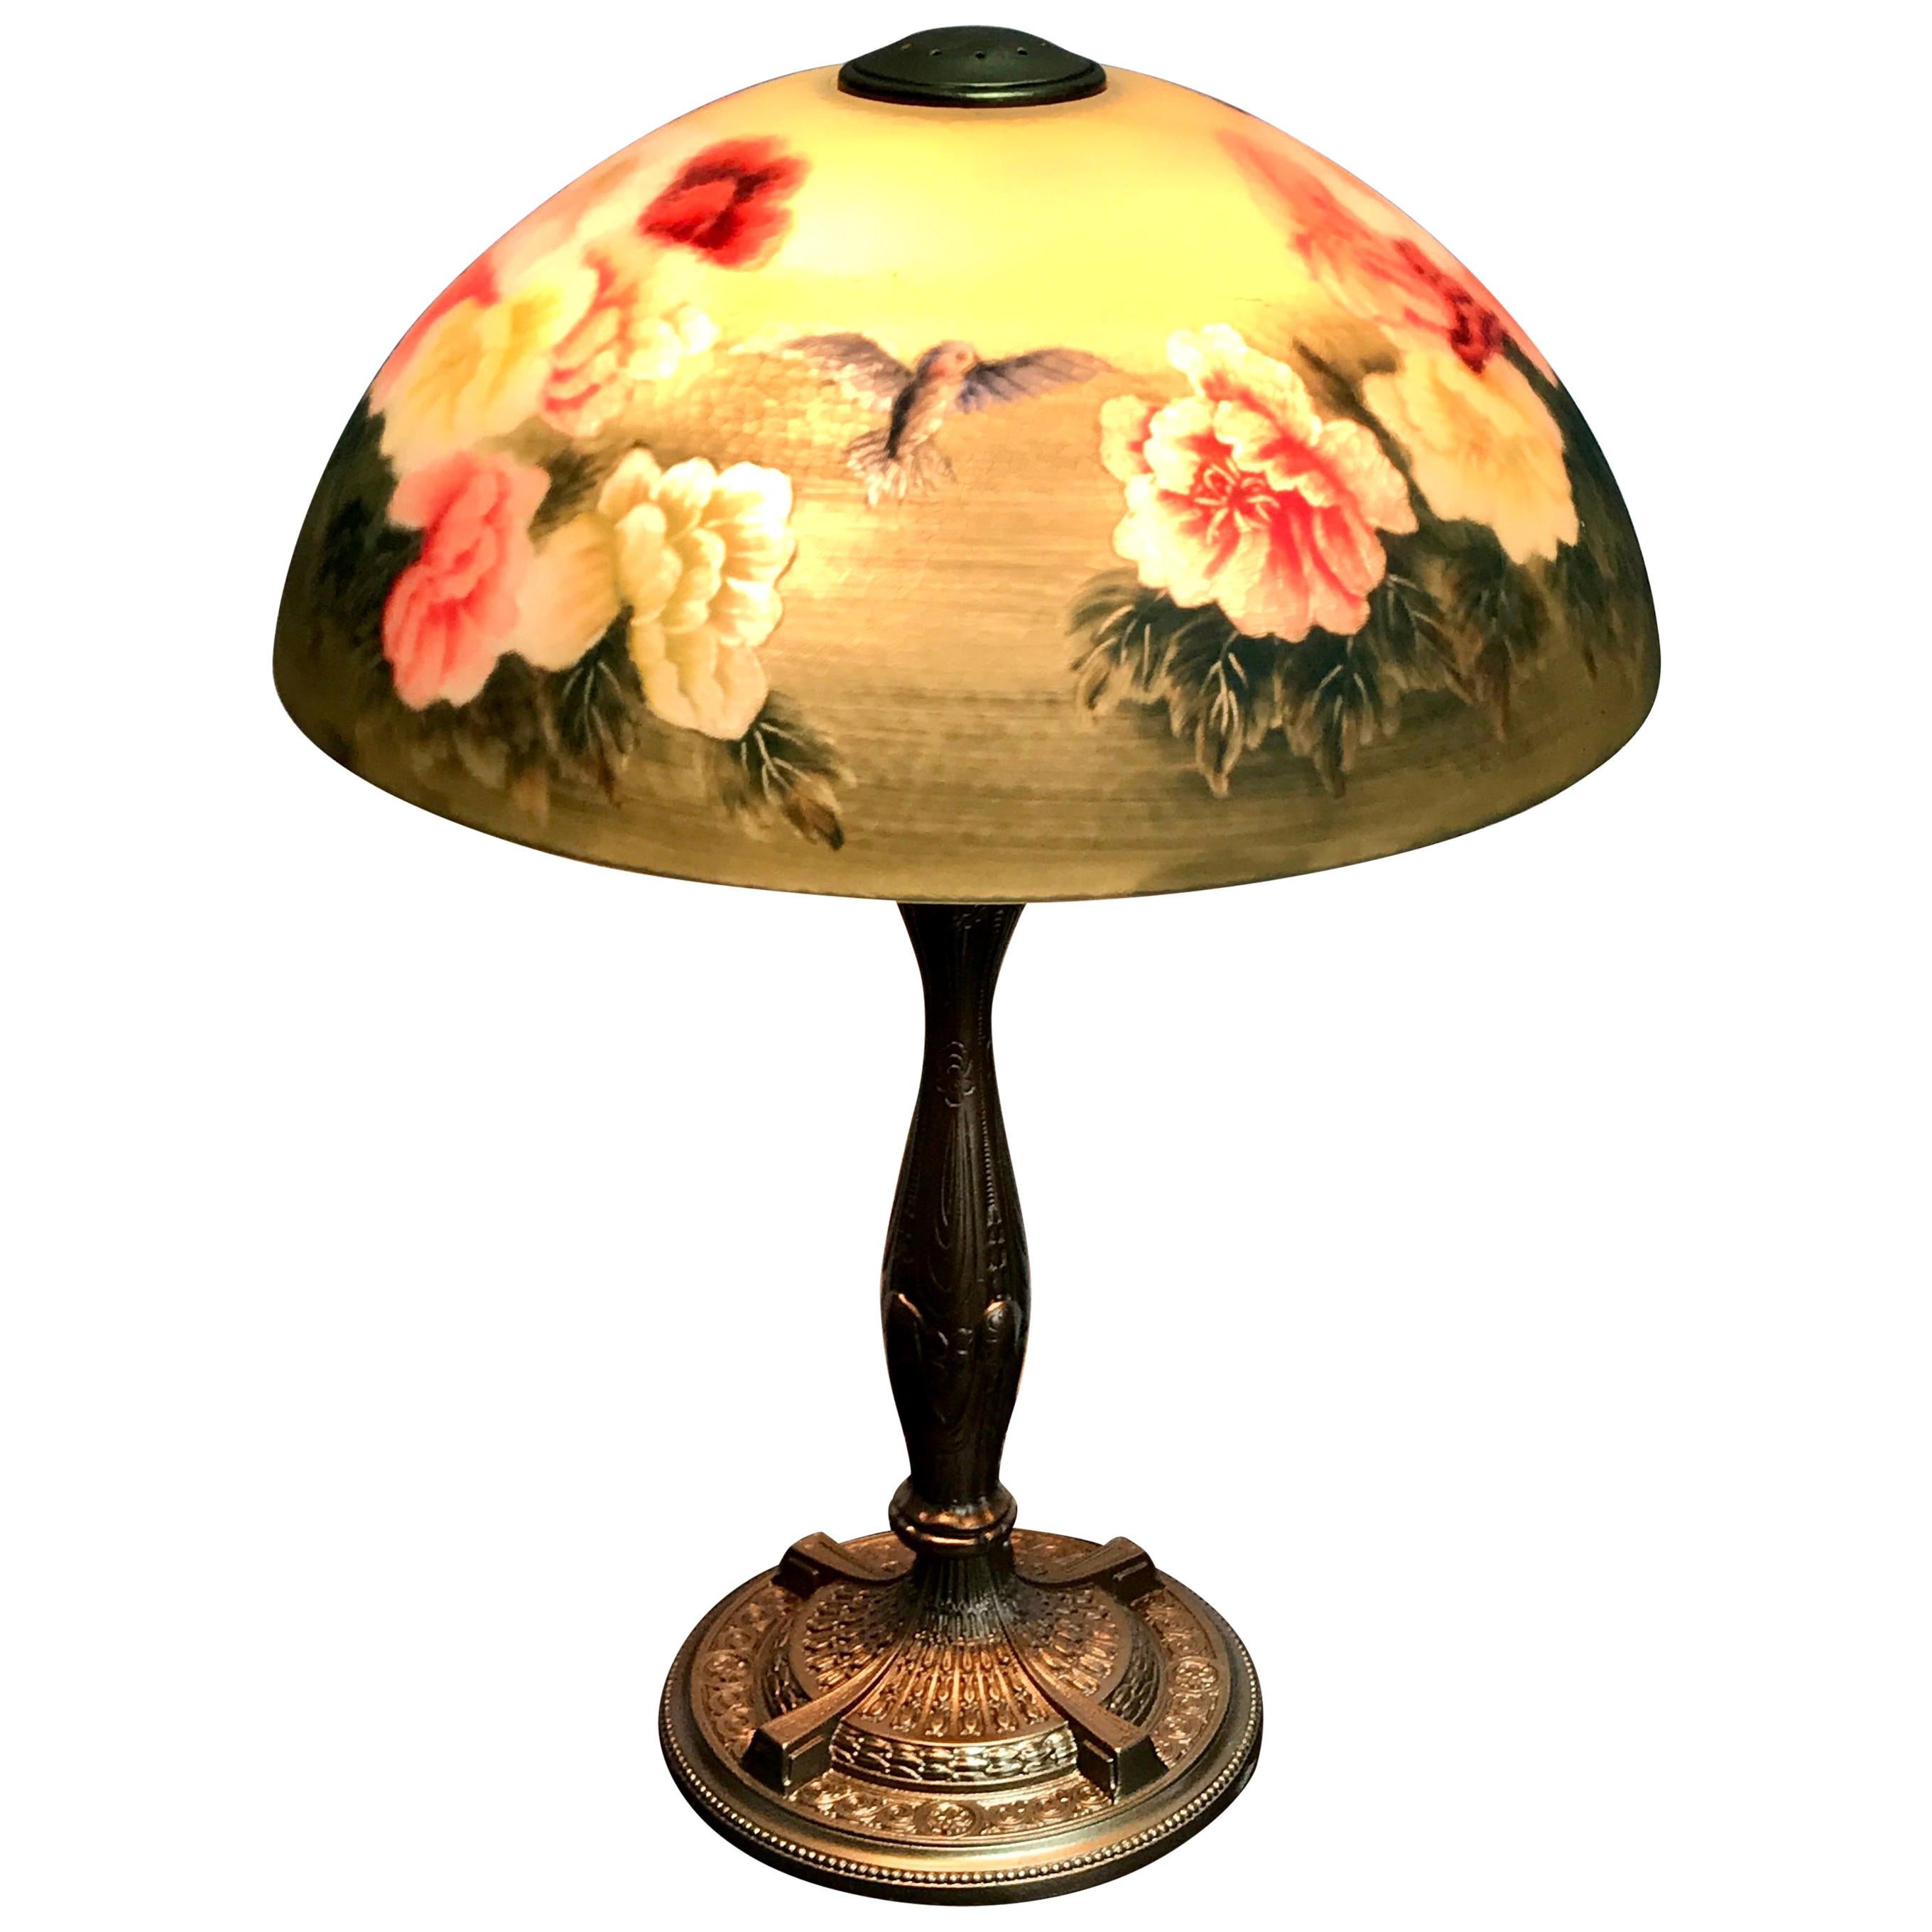 Handel Style Reverse Painted Table Lamp Birds and Flower Motif